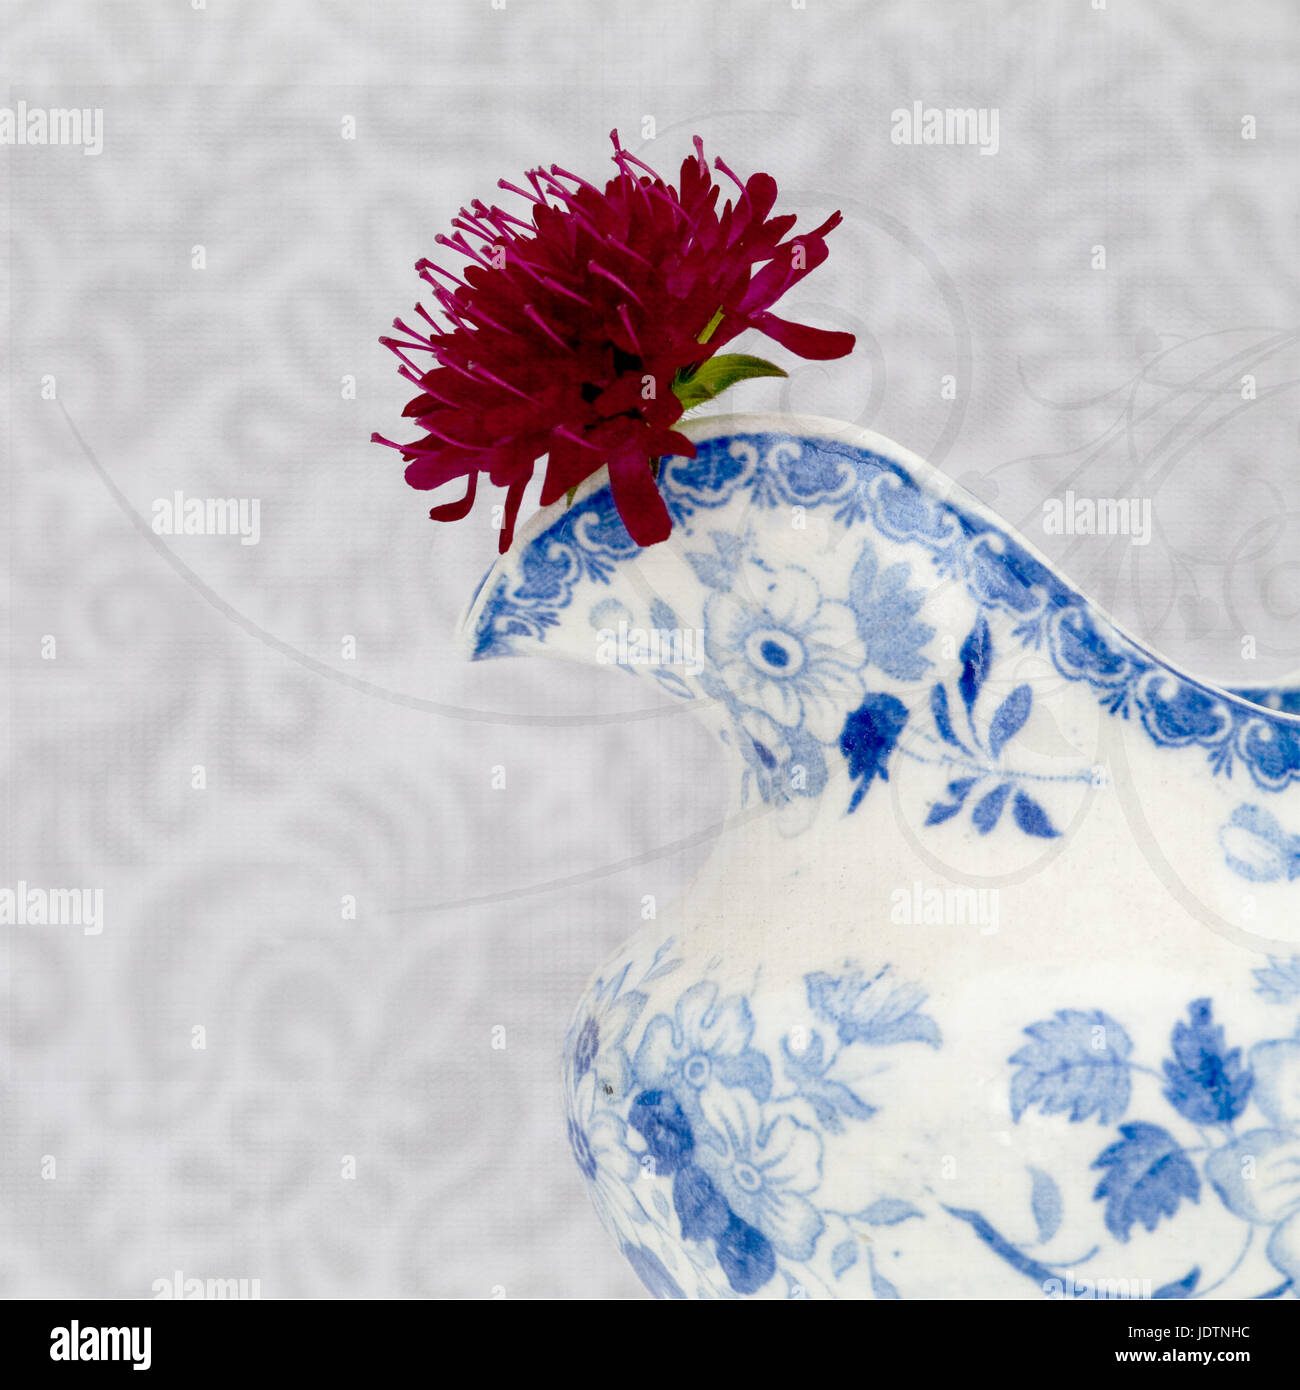 Study of flower in a jug. Stock Photo